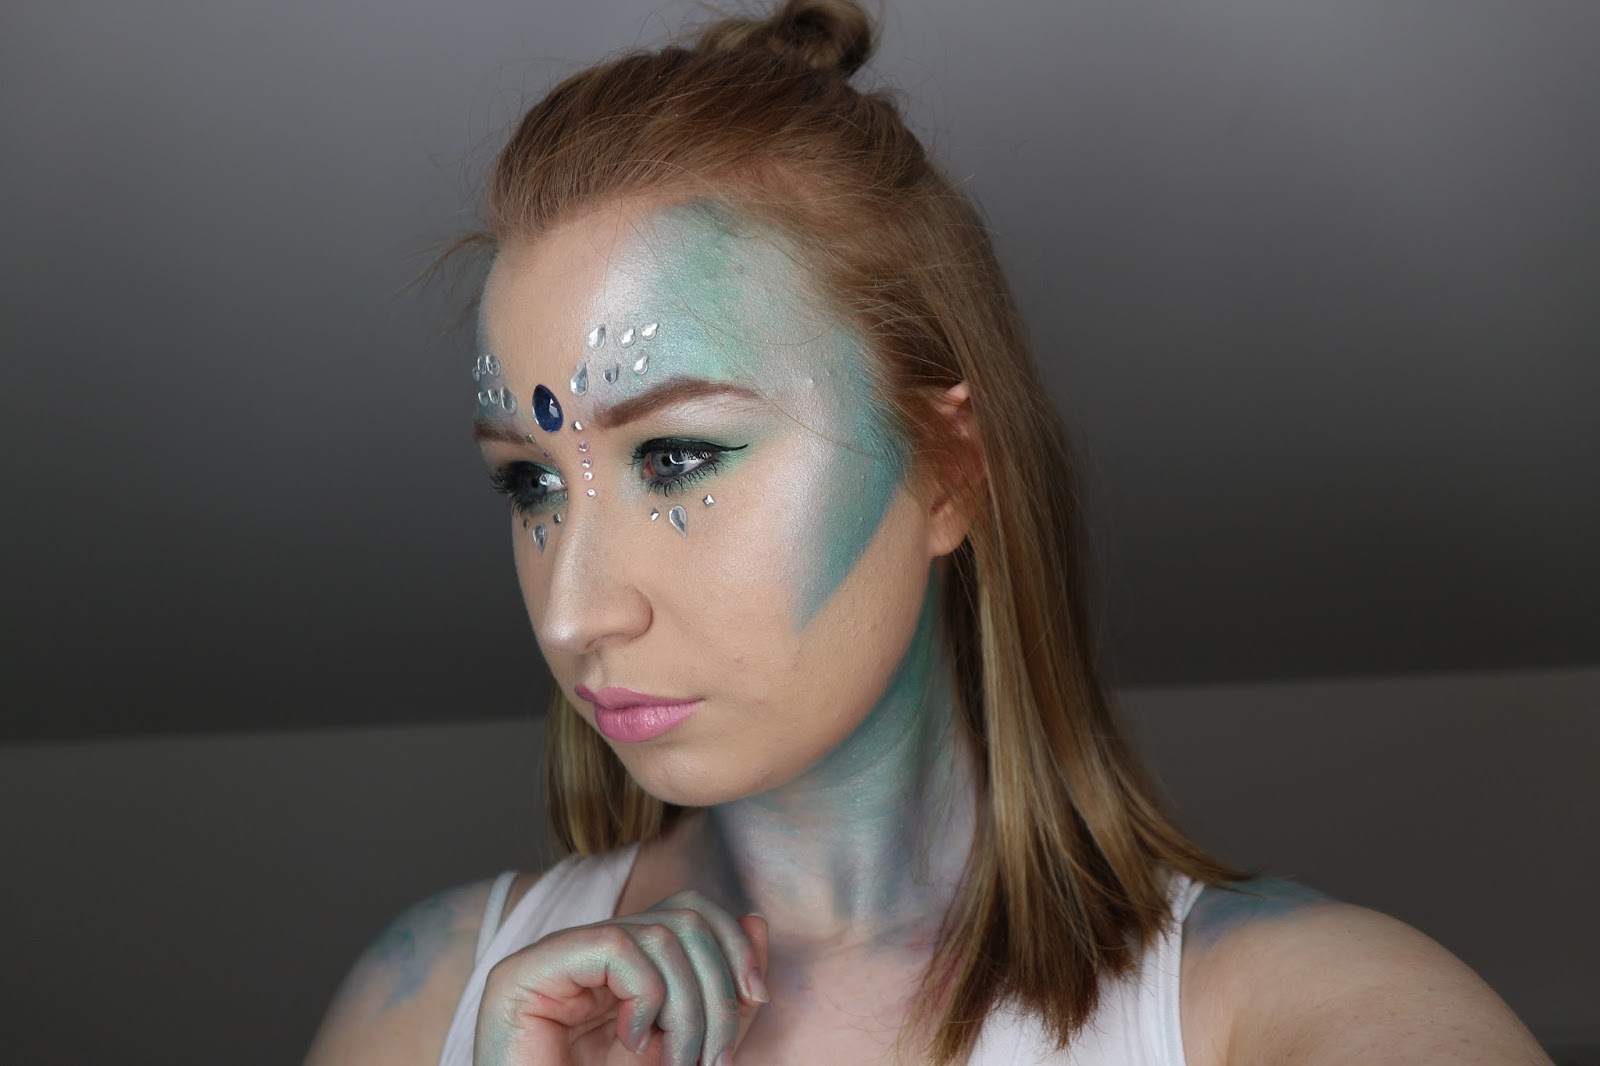 The only mermaid makeup tutorial you need this Halloween